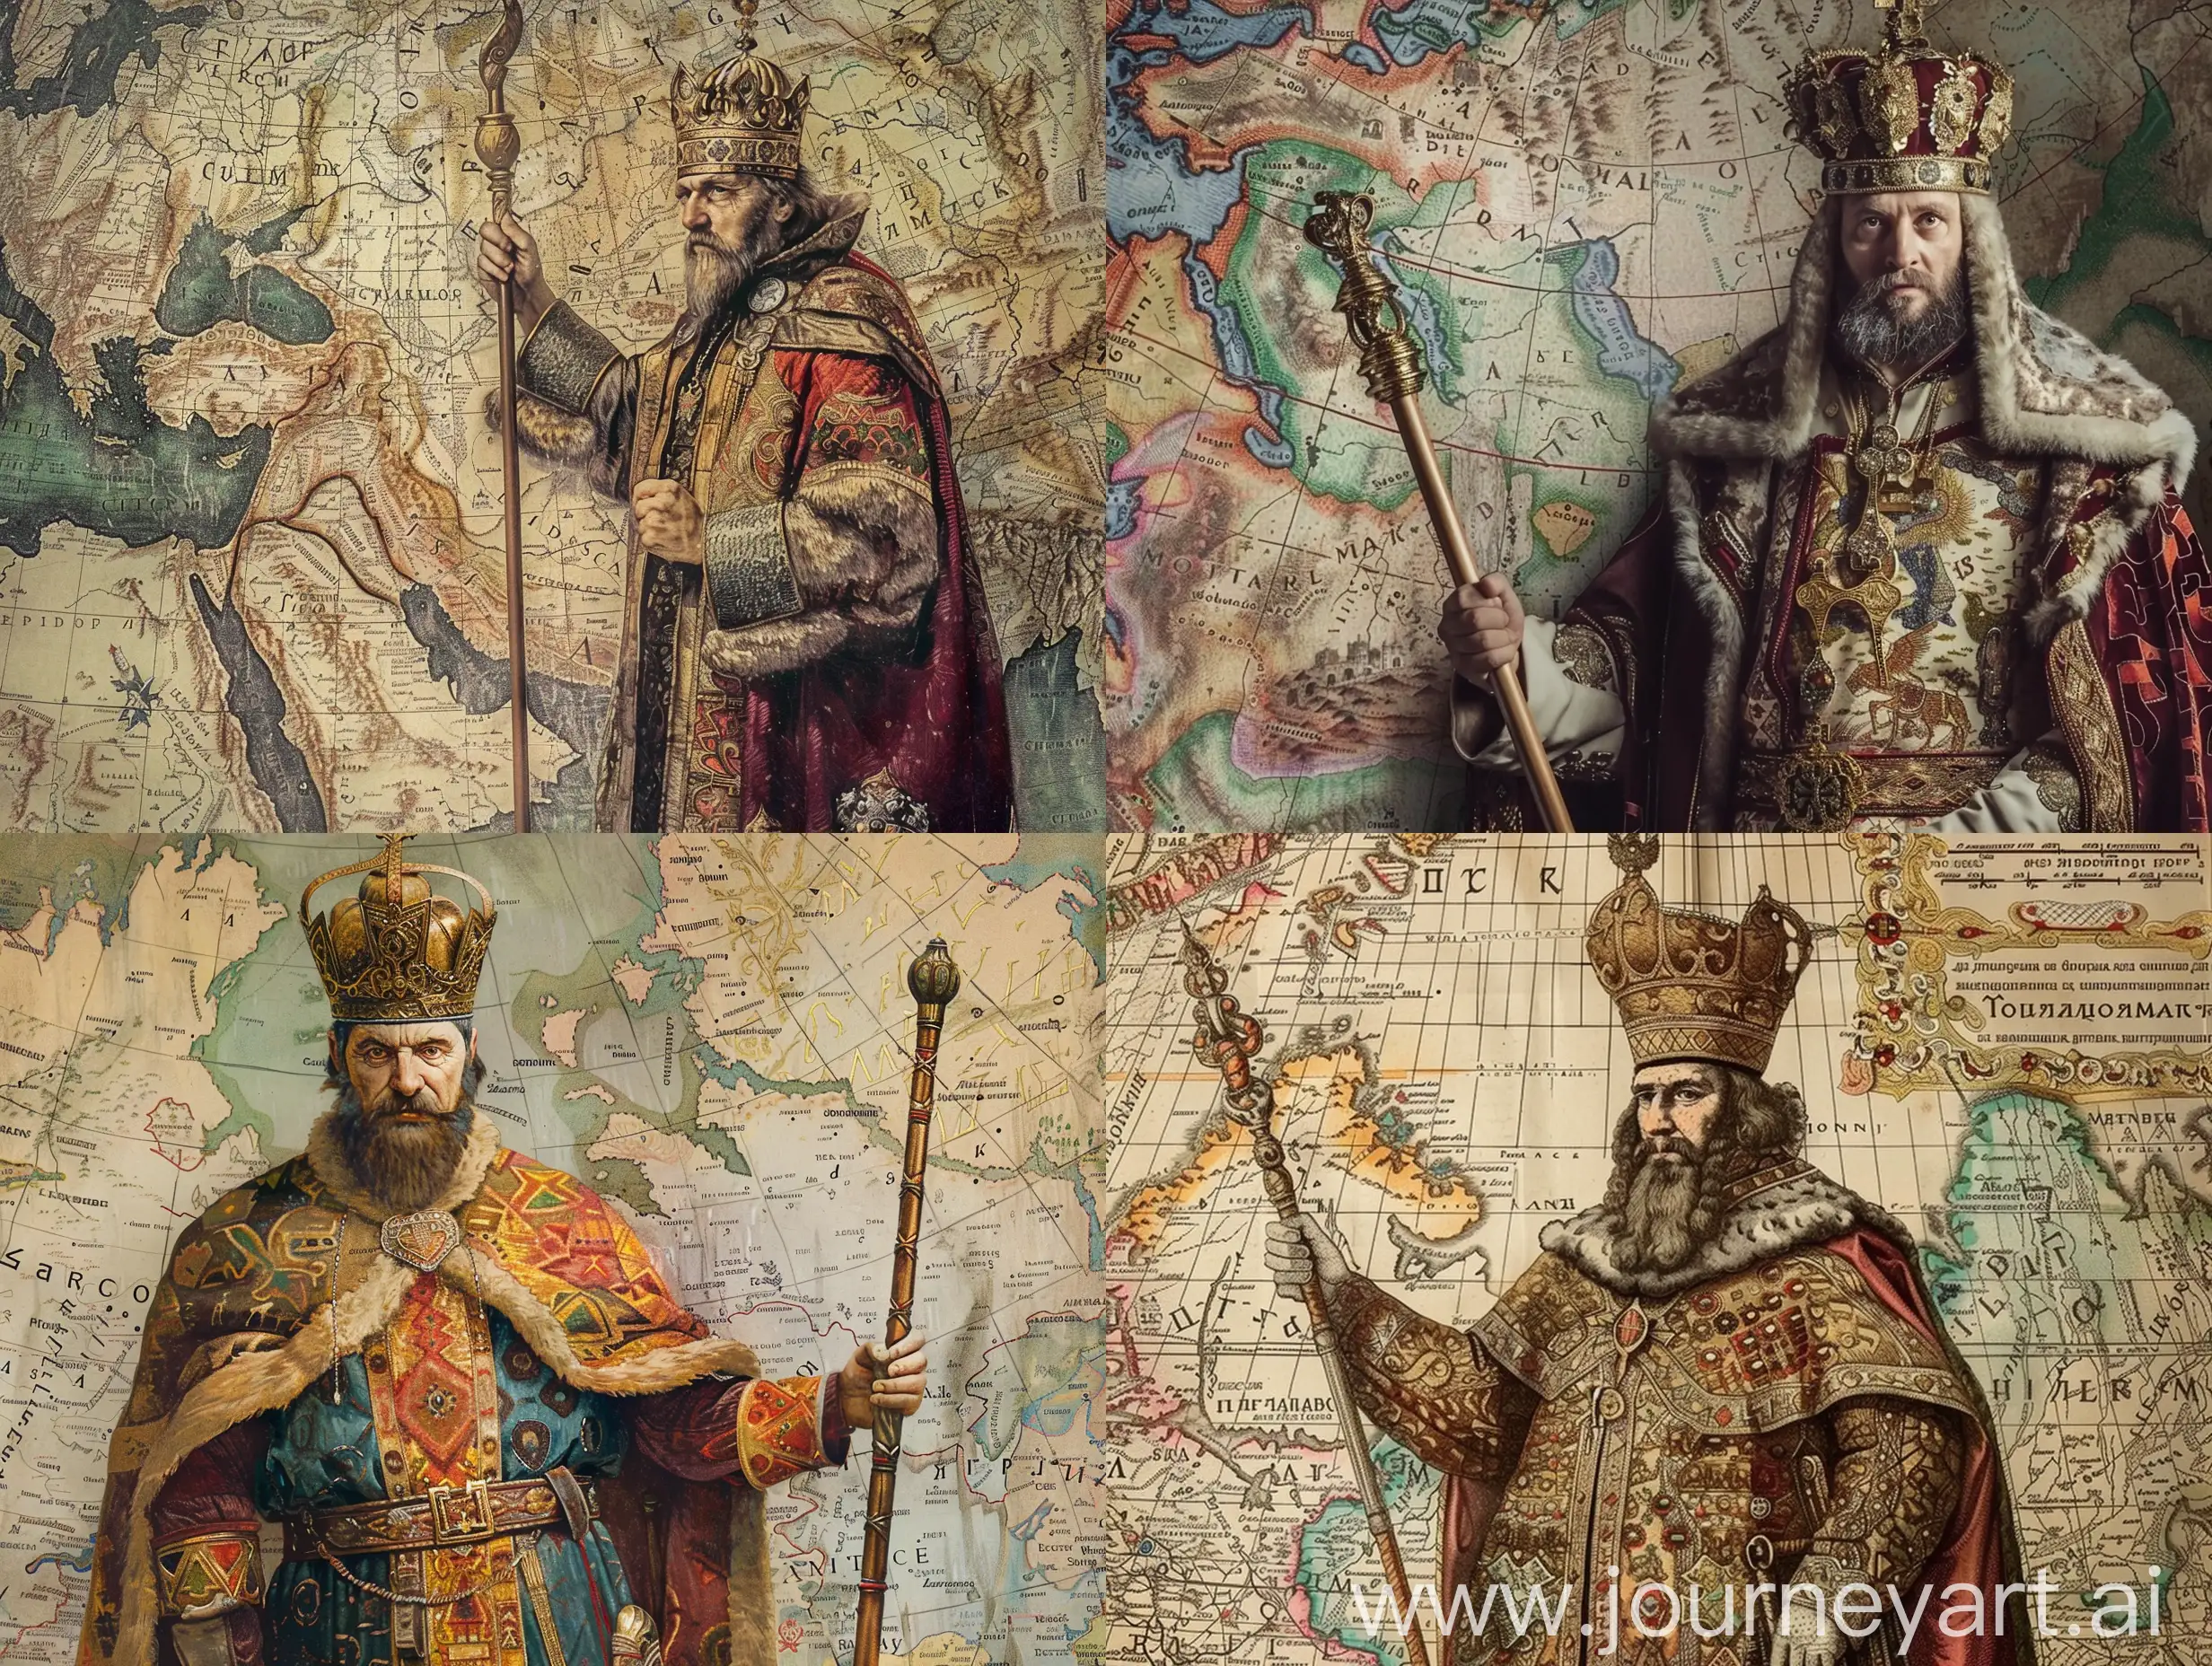 Ivan-the-Third-Moscow-Prince-Wearing-Monomakhs-Cap-and-Holding-a-Staff-on-Ancient-Rus-Map